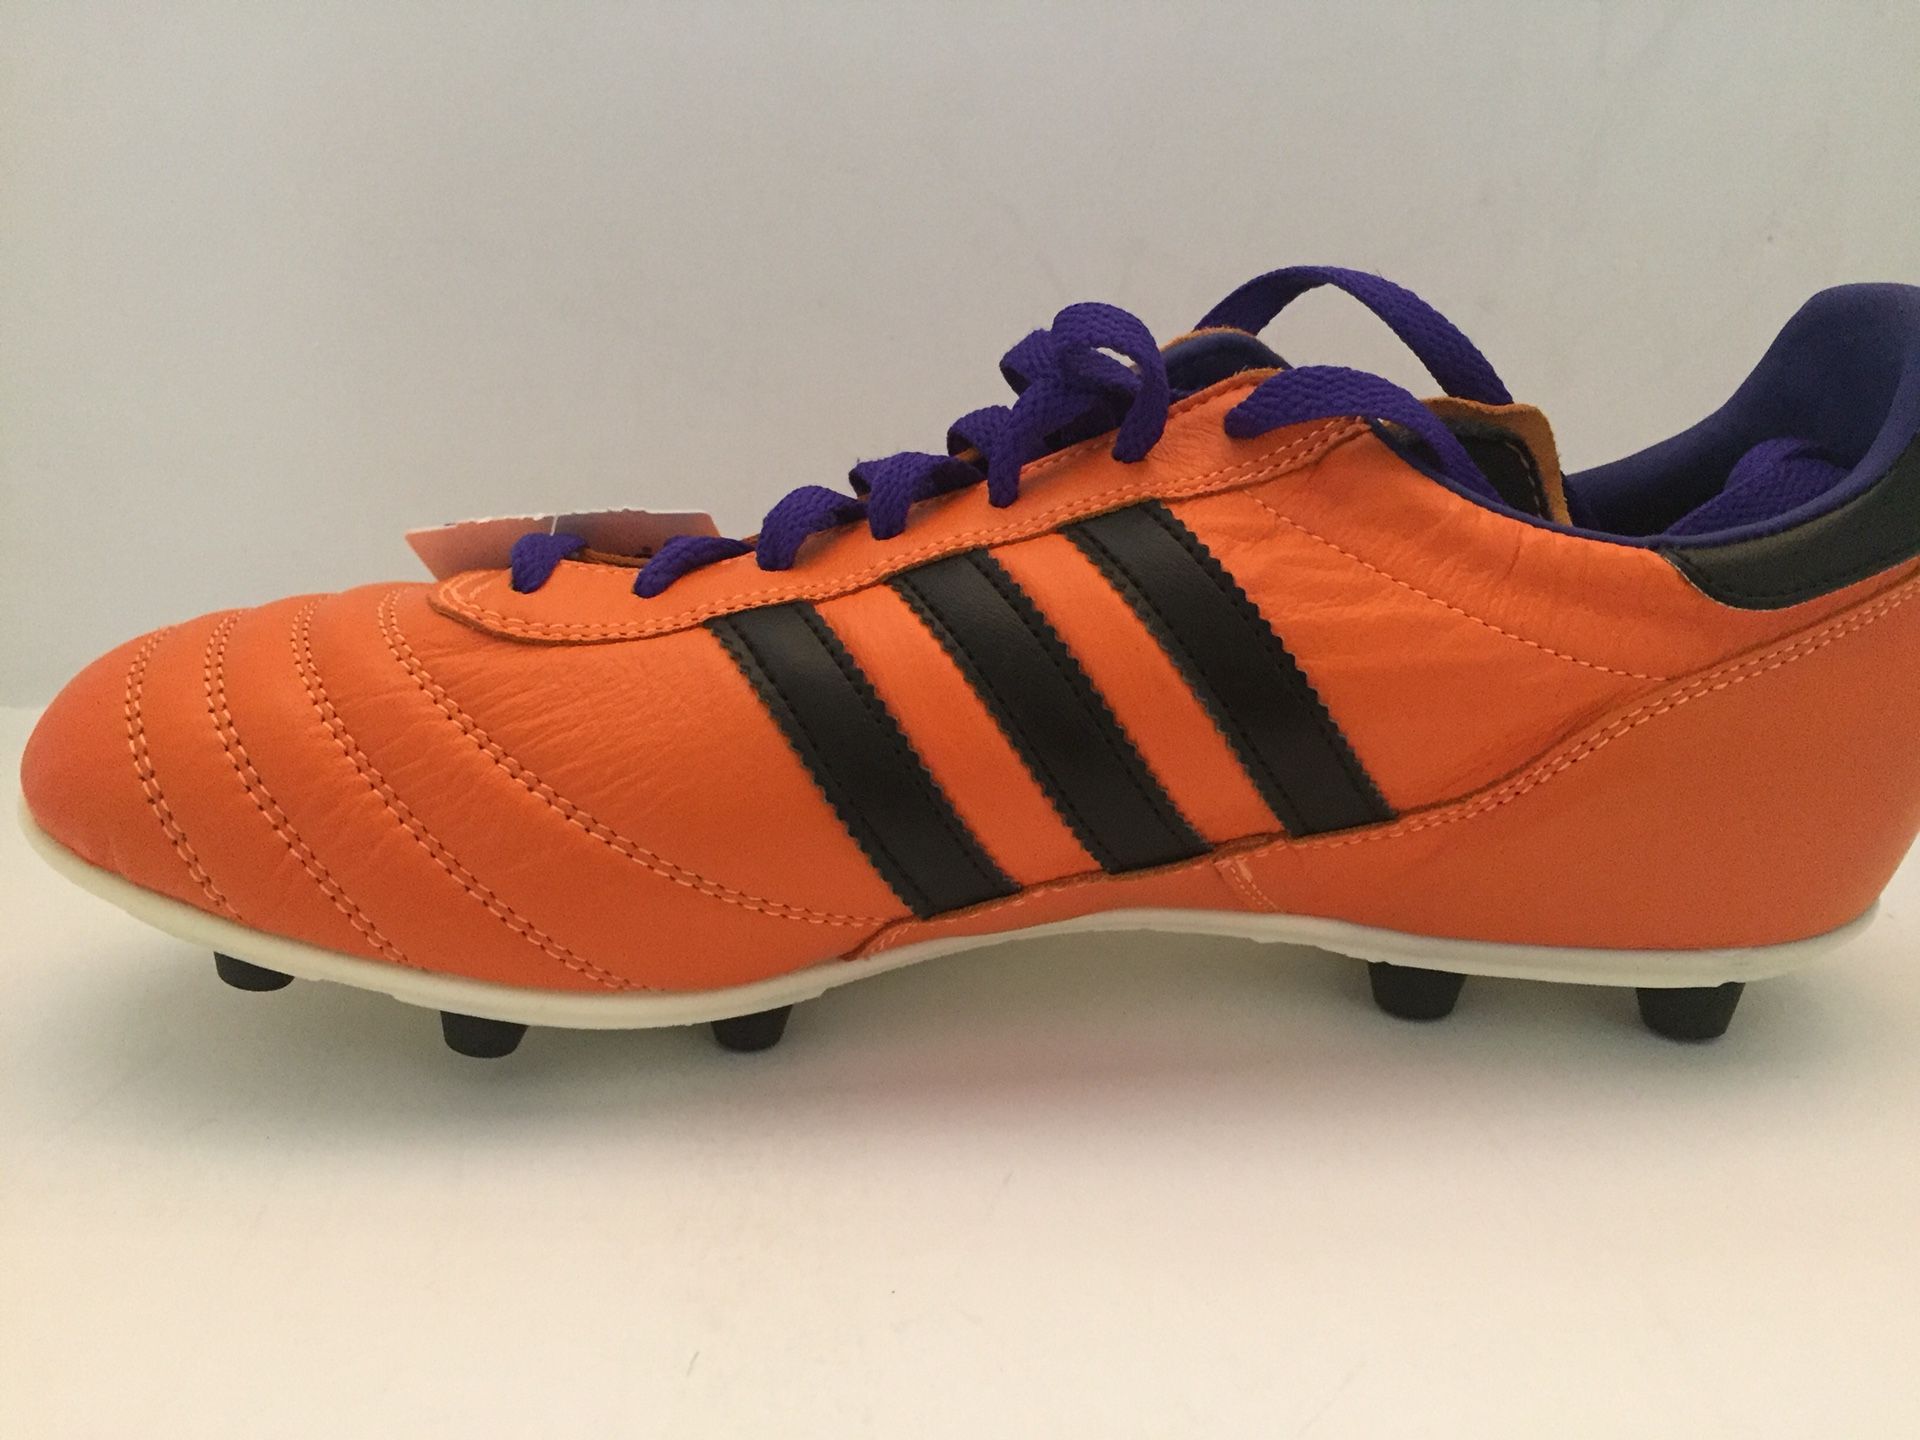 adidas copa Kangaroo Leather soccer cleats size 9.5 in La Verne, CA - OfferUp